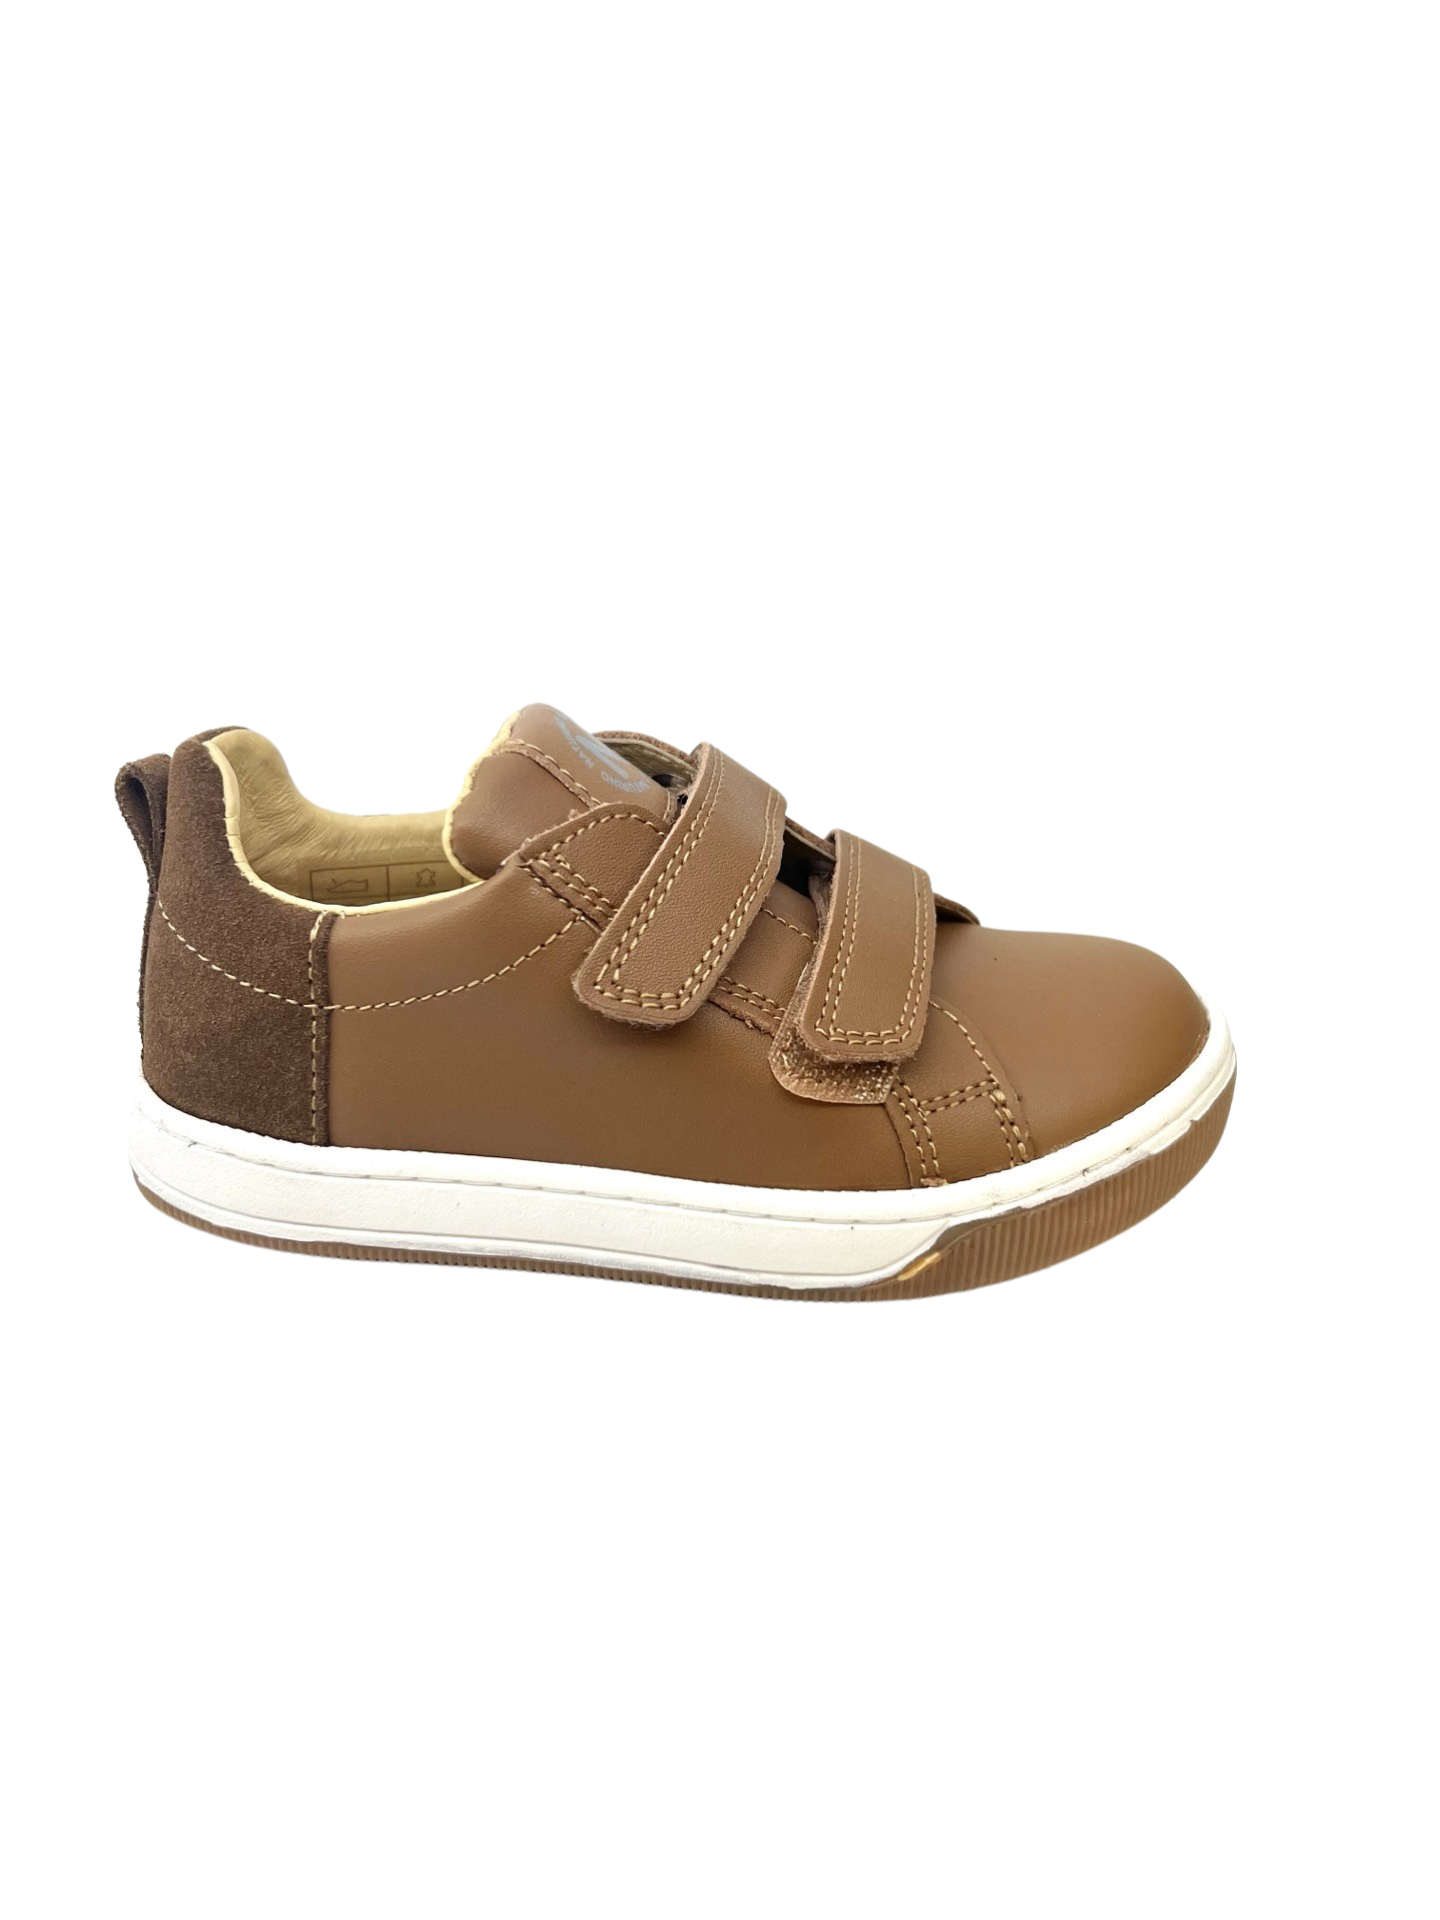 Naturino Luggage Double Velcro Sneaker With Suede Back - Caleb